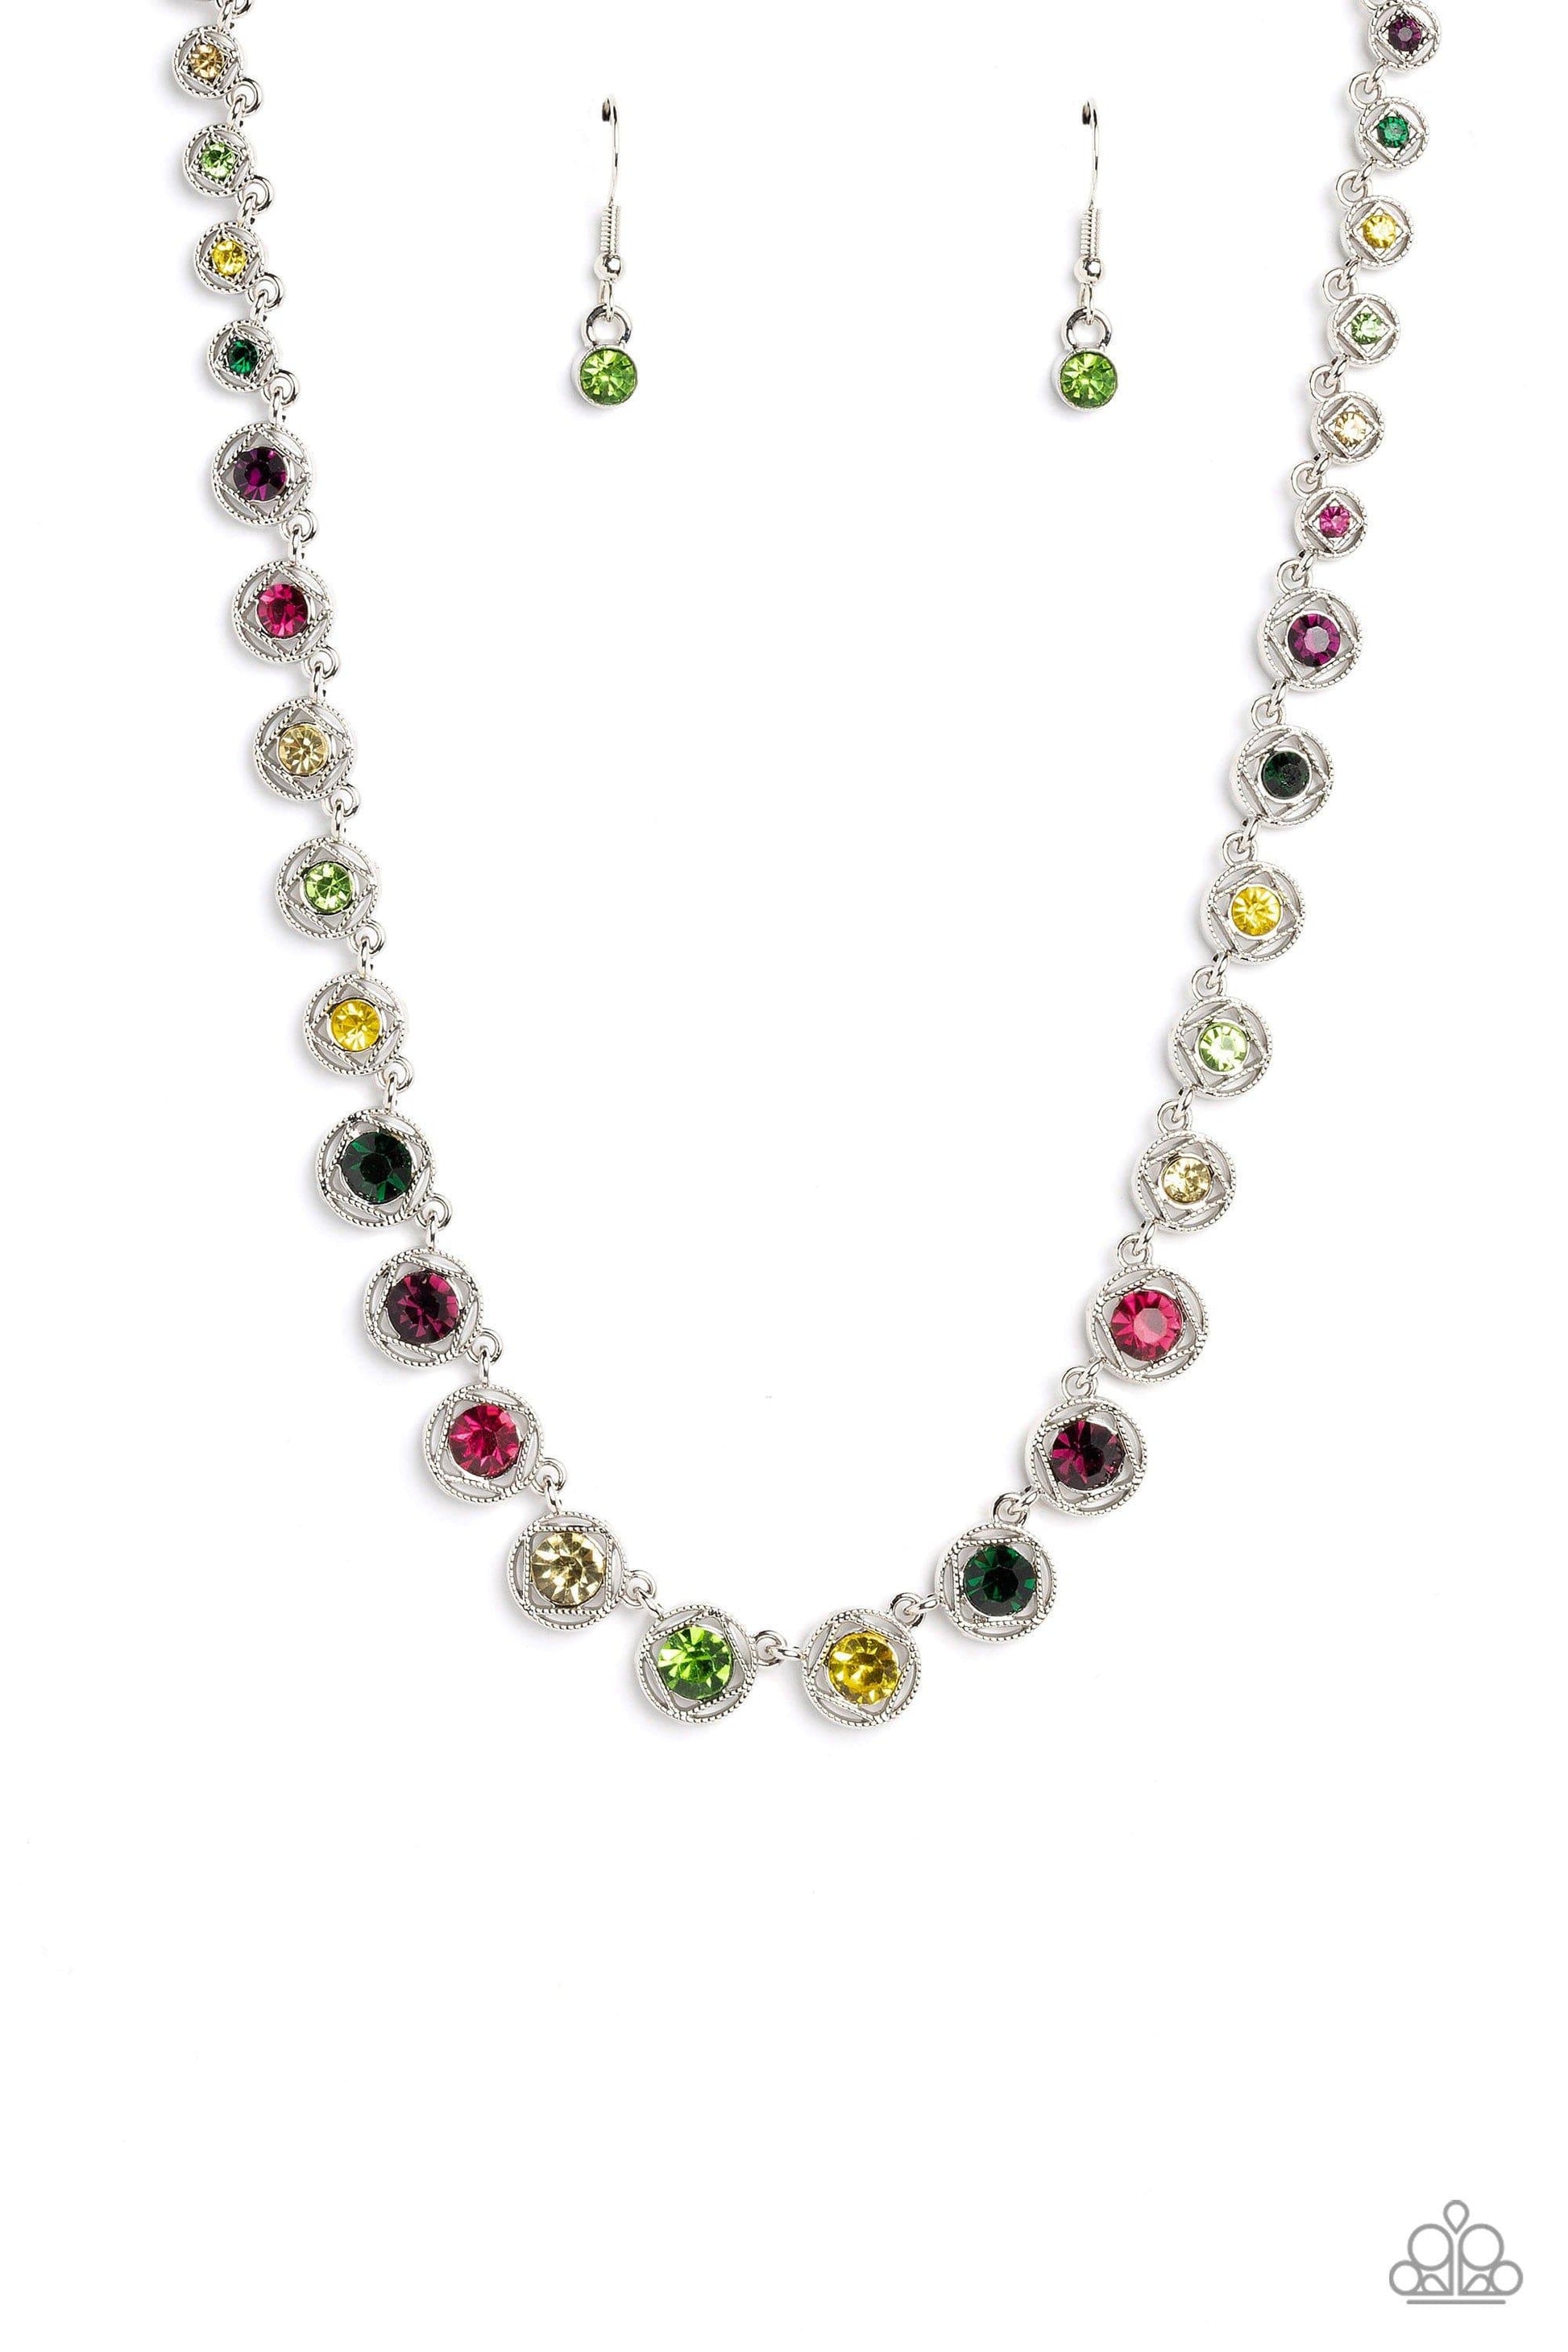 Paparazzi Accessories - Kaleidoscope Charm - Multicolor Necklace - Bling by JessieK